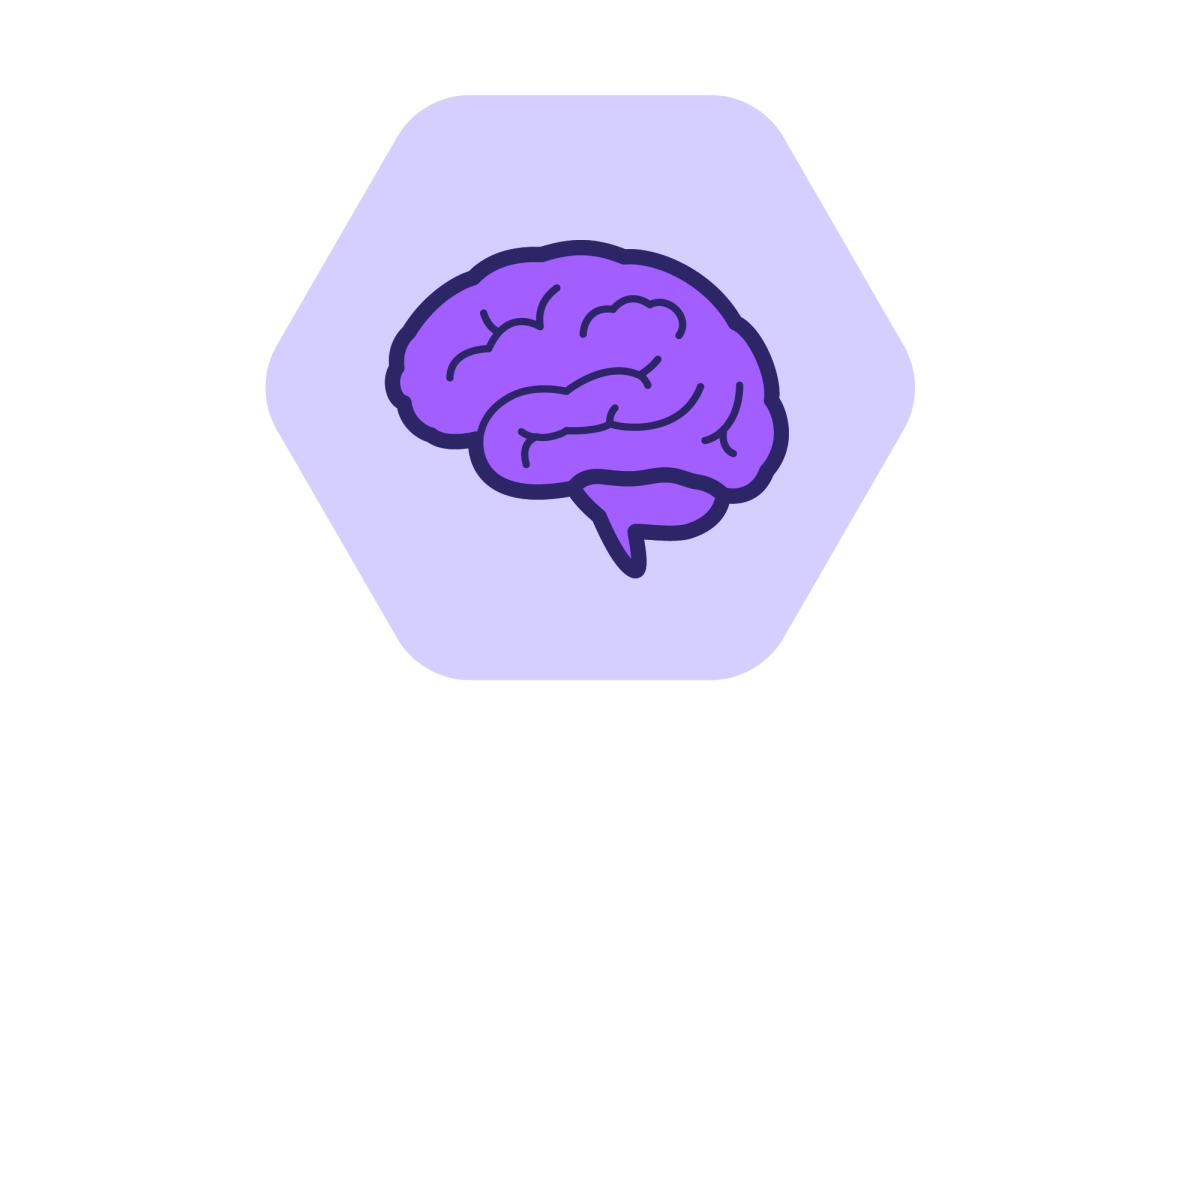 Changing Brains logo purple without text